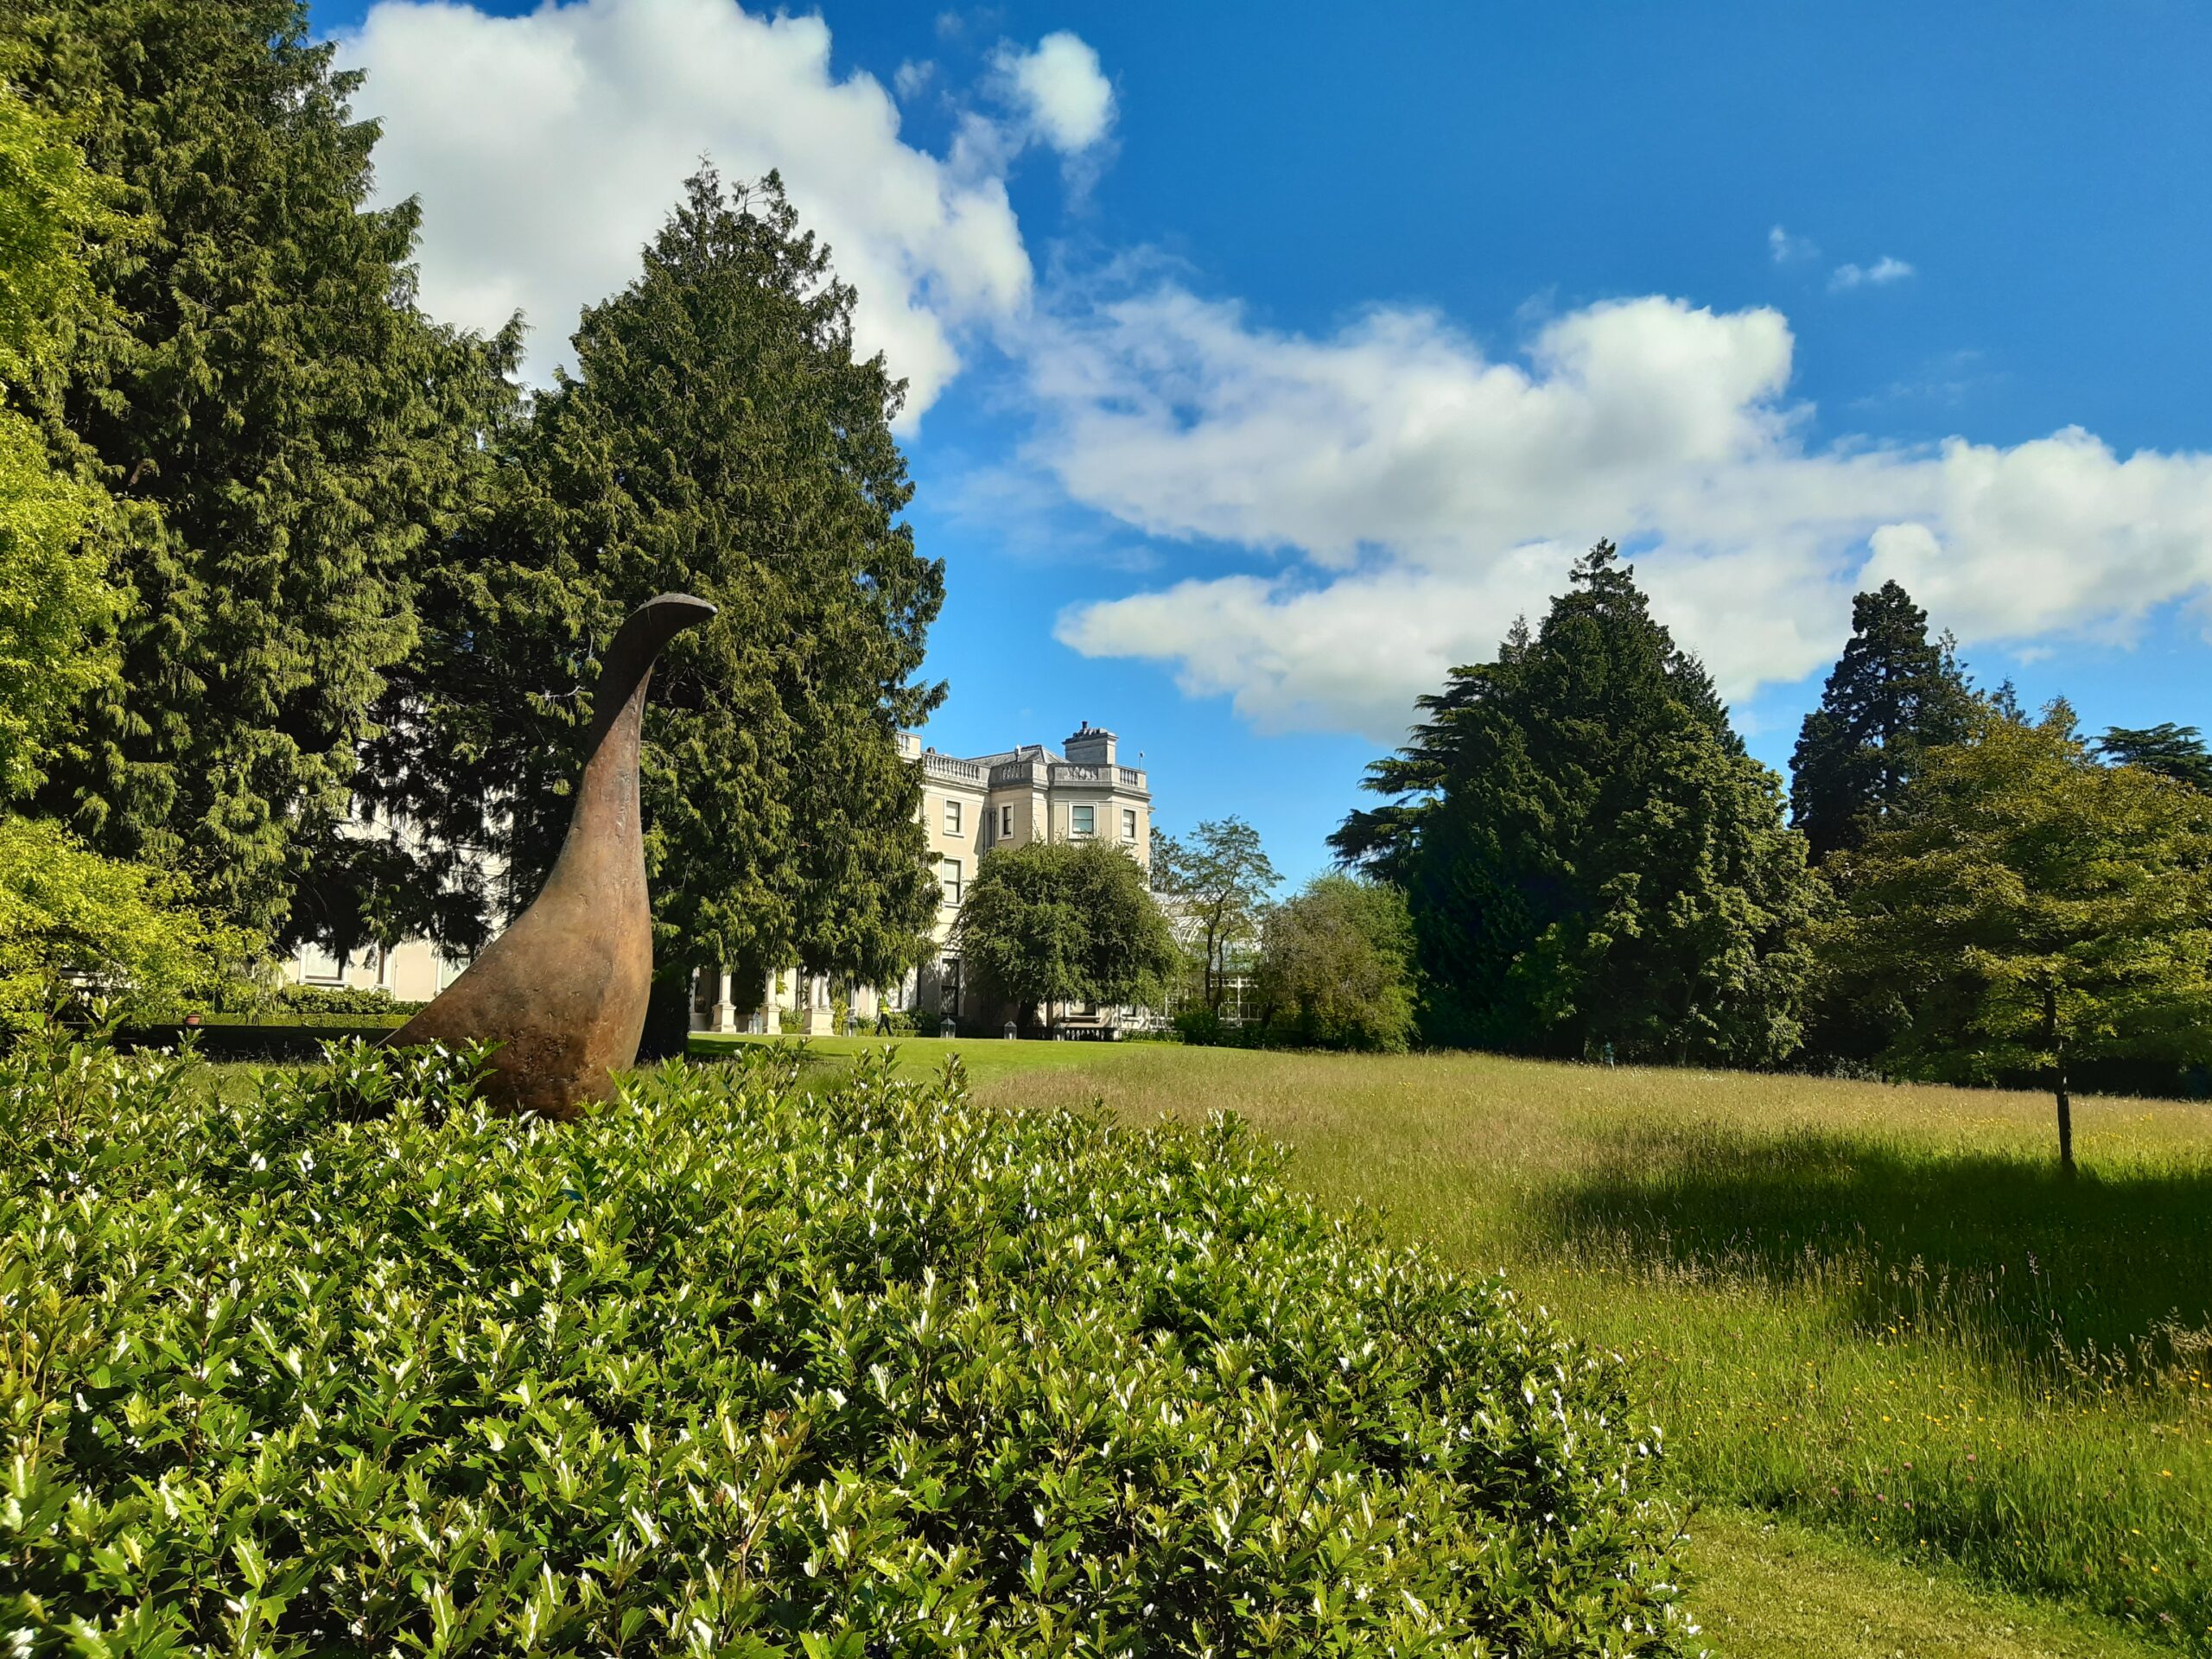 Sculpture of bronze bird on lawn in front of Farmleigh House, house partially obscured by trees.